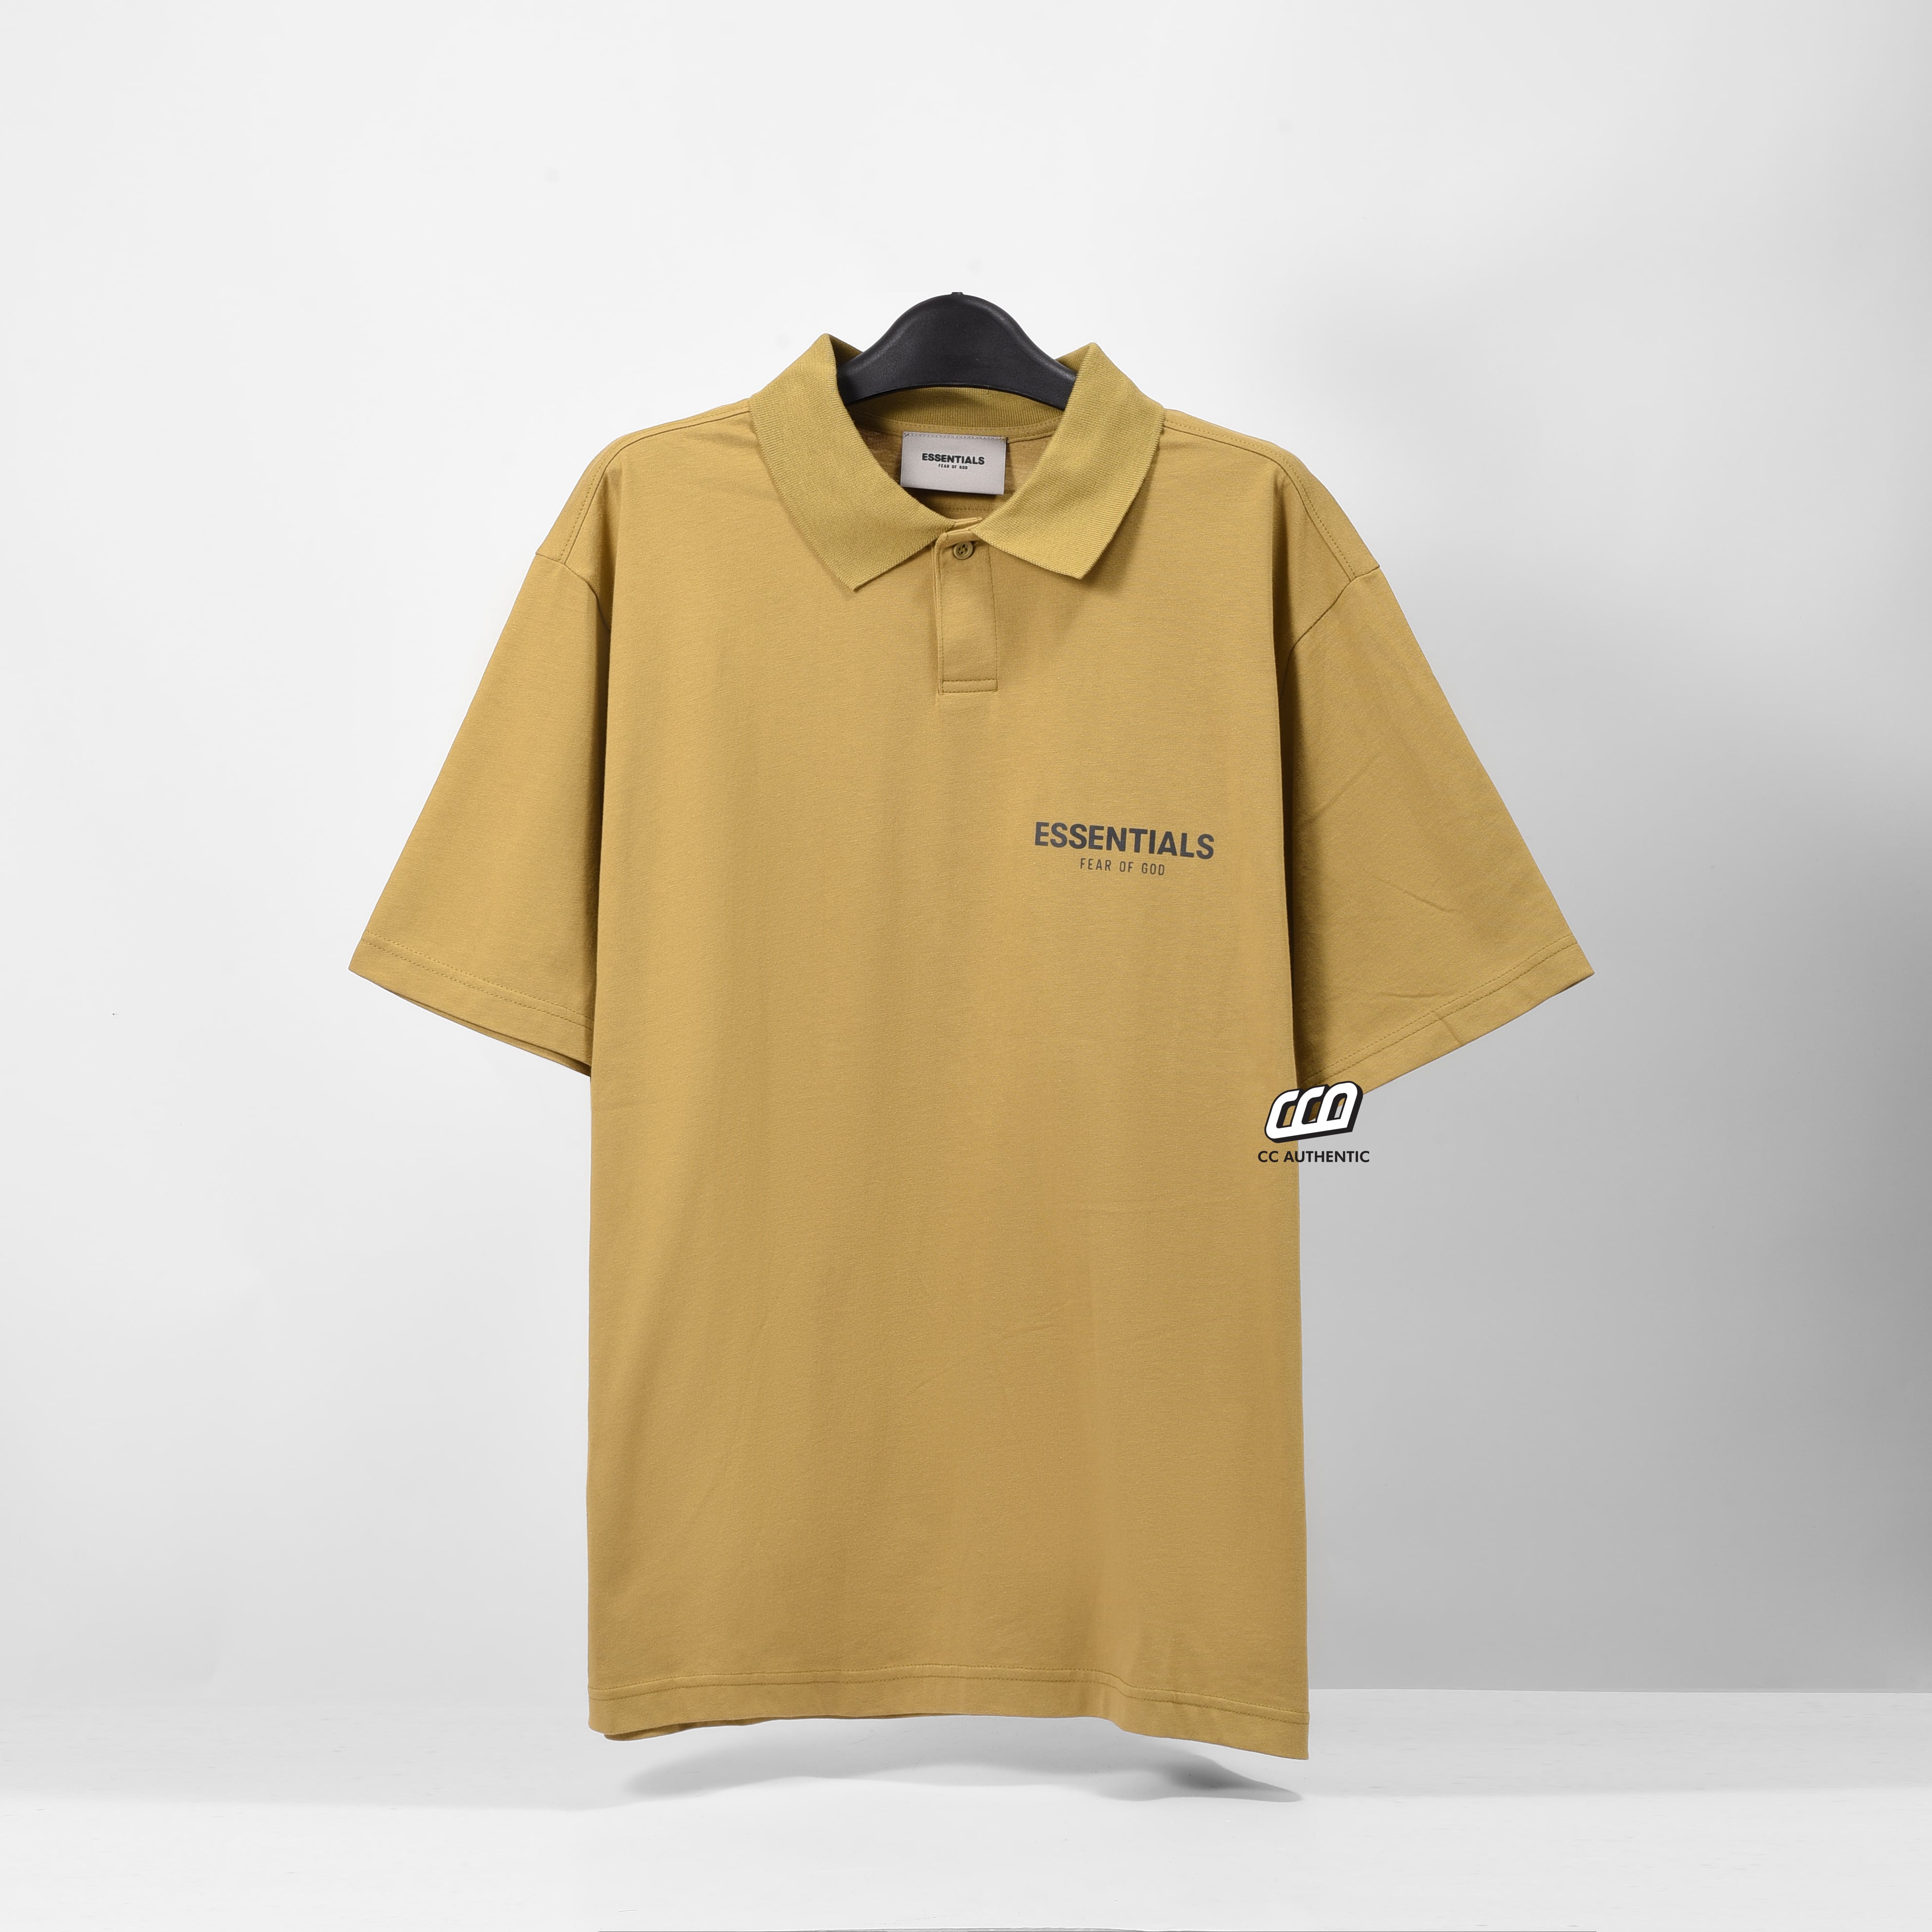 FEAR OF GOD ESSENTIALS POLO 2021 - amber